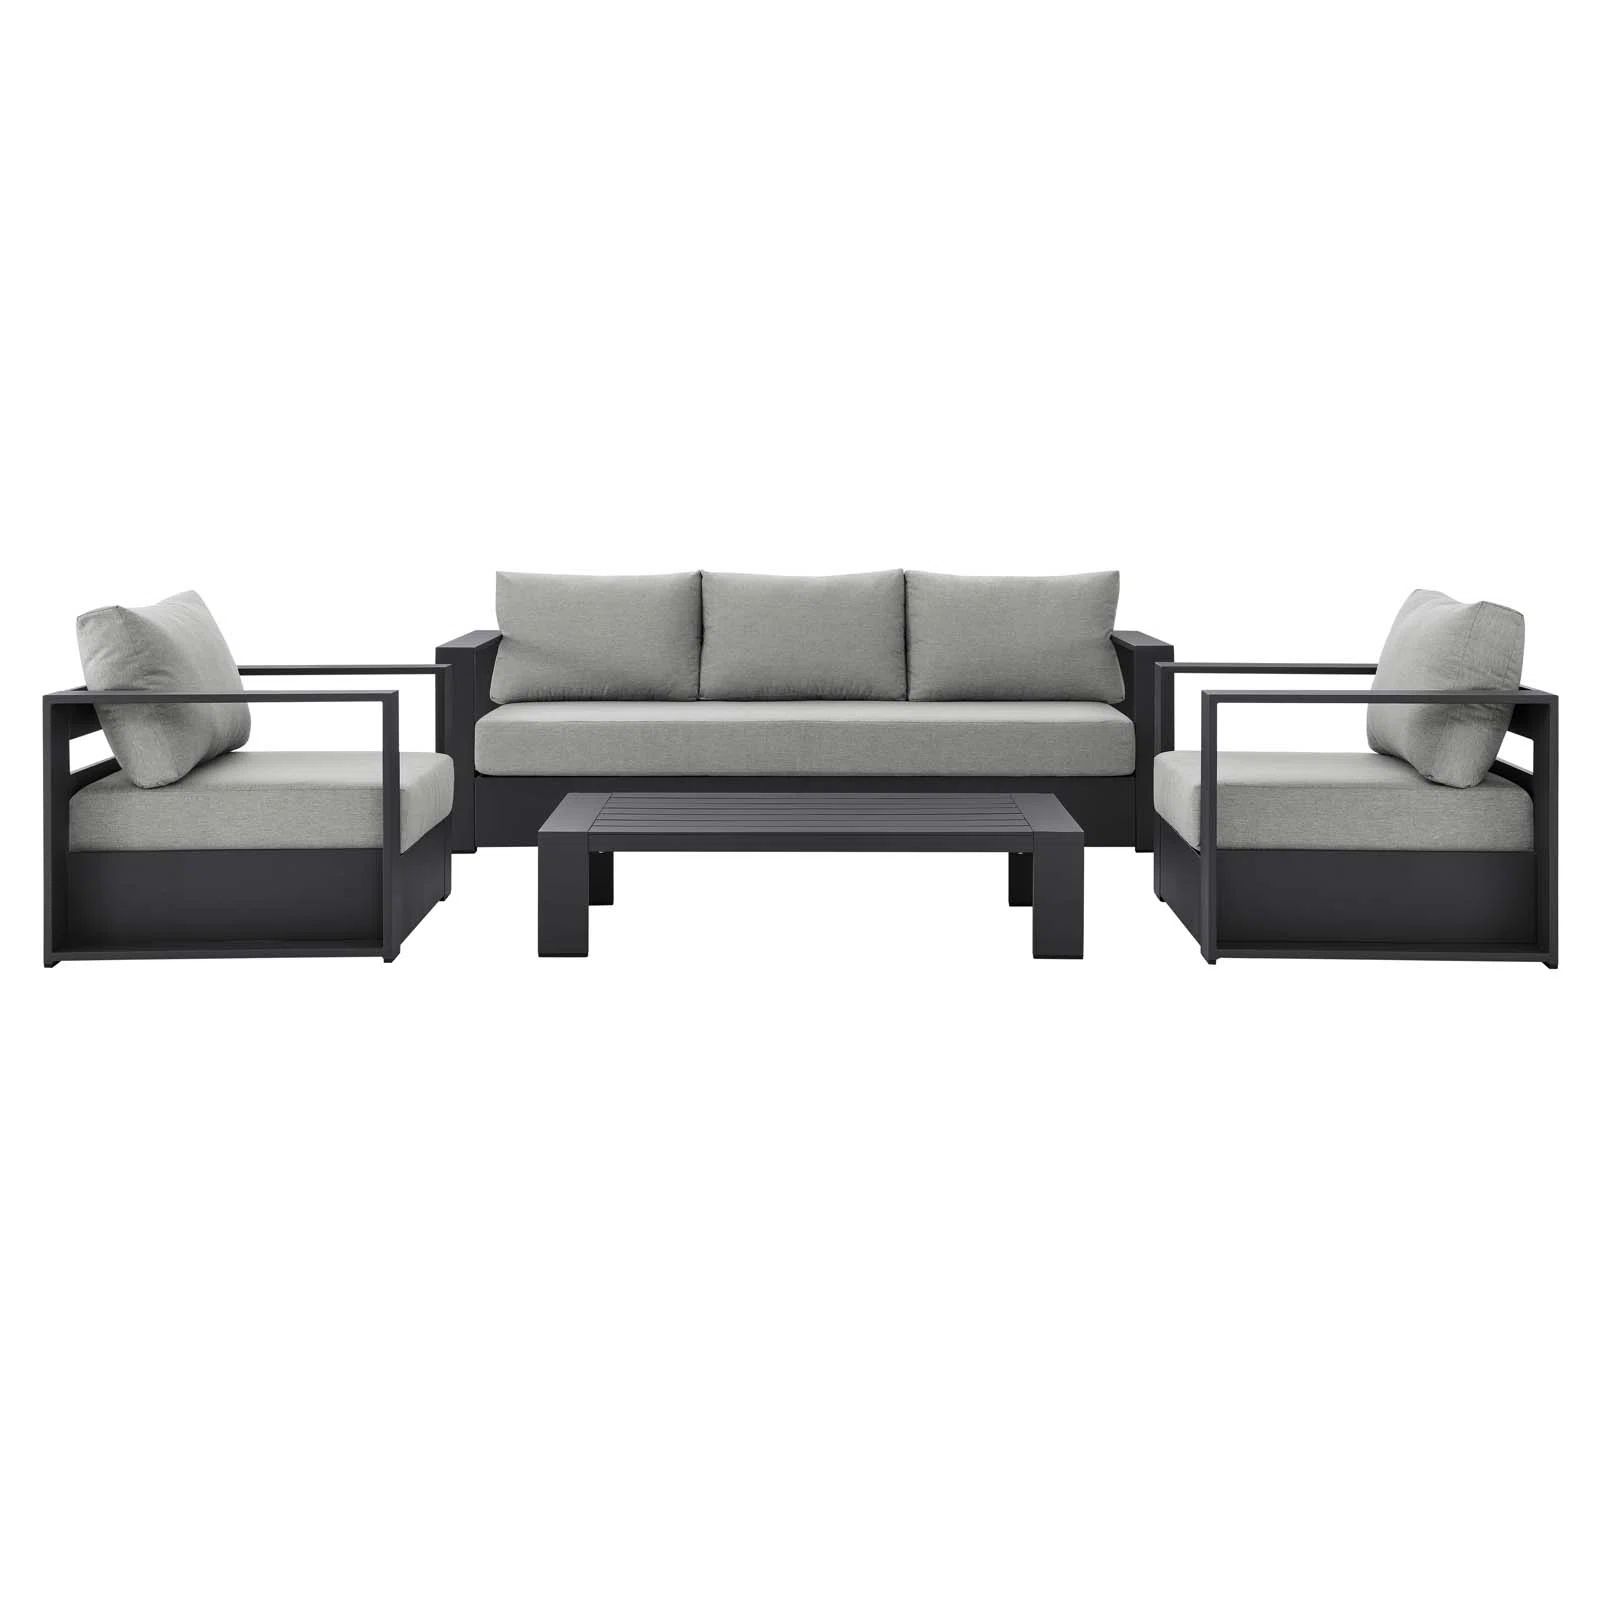 Modway Tahoe Outdoor Aluminum 4-piece Conversation Set with Coffee Table | Wayfair North America